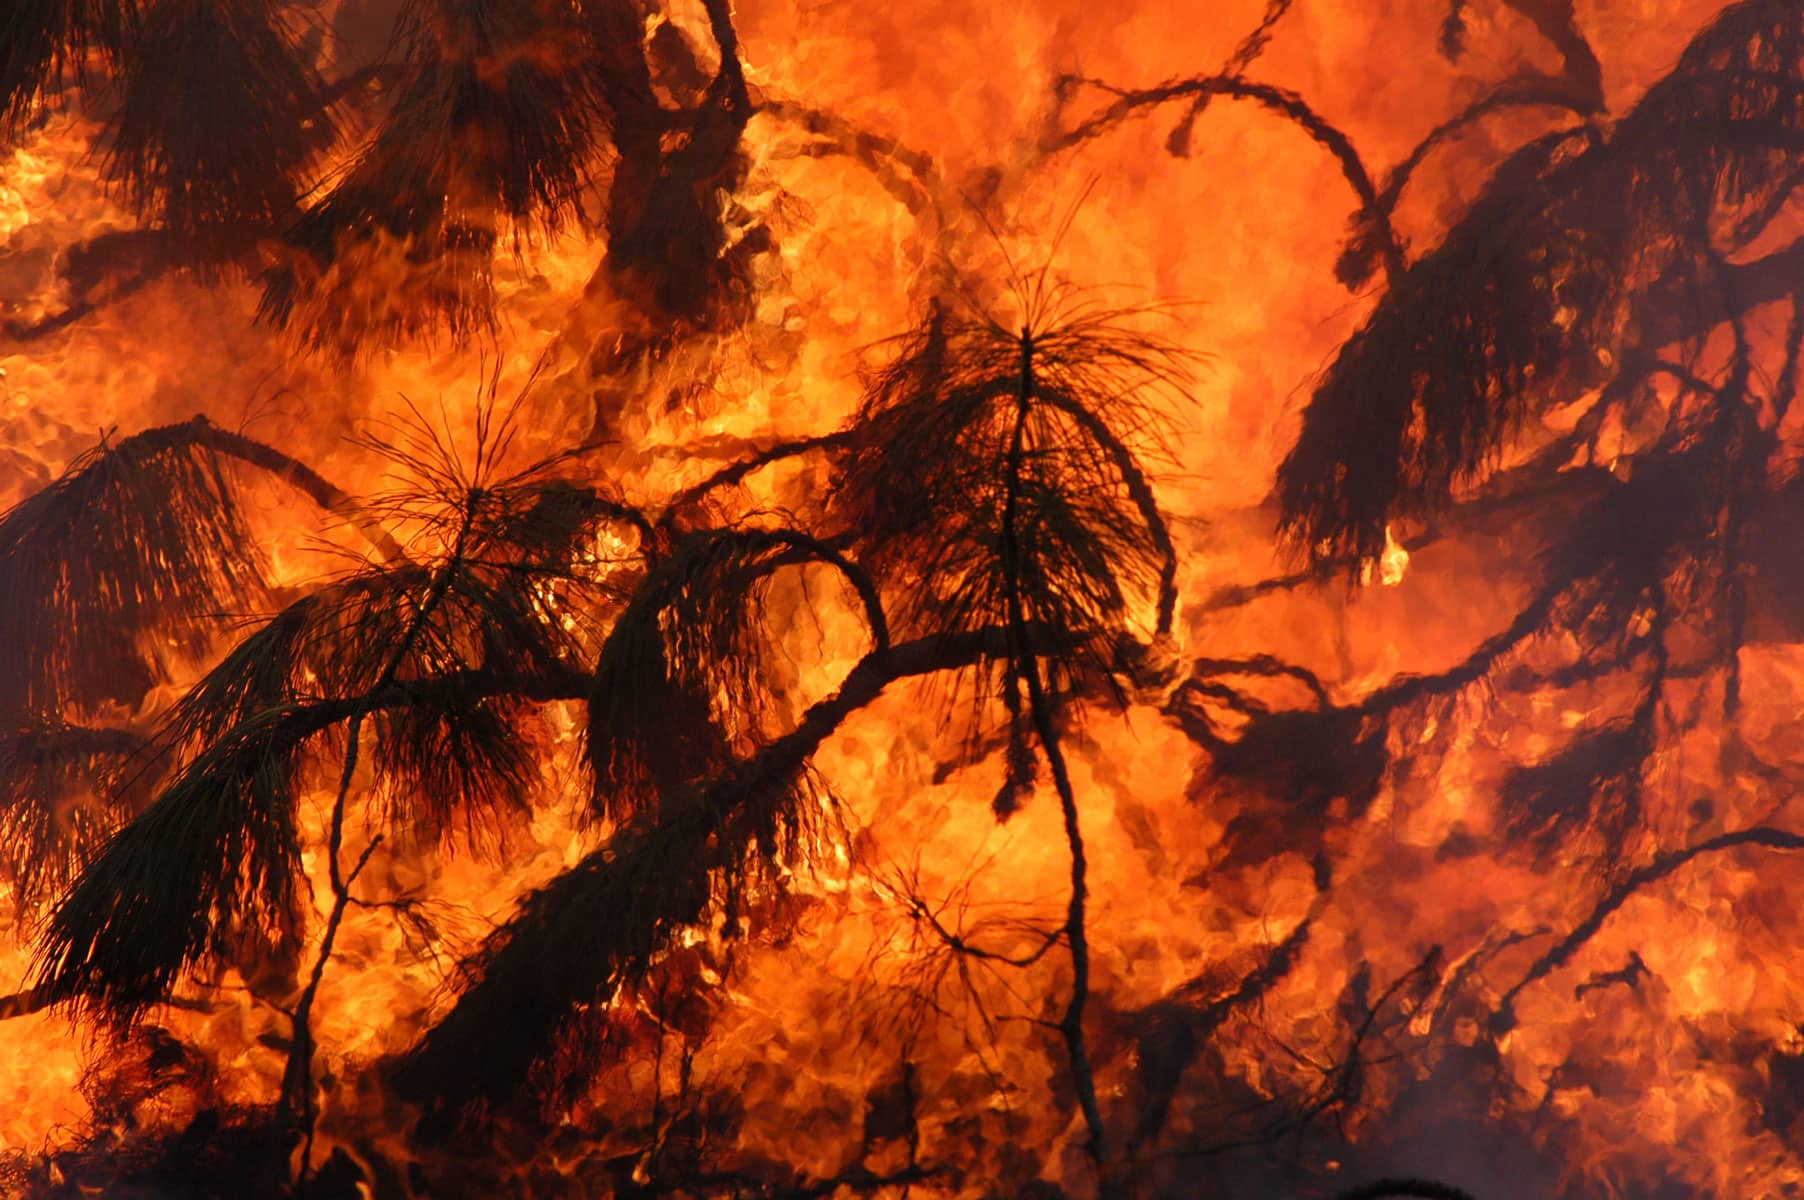 A close-up of a wildfire burning through a pine tree.